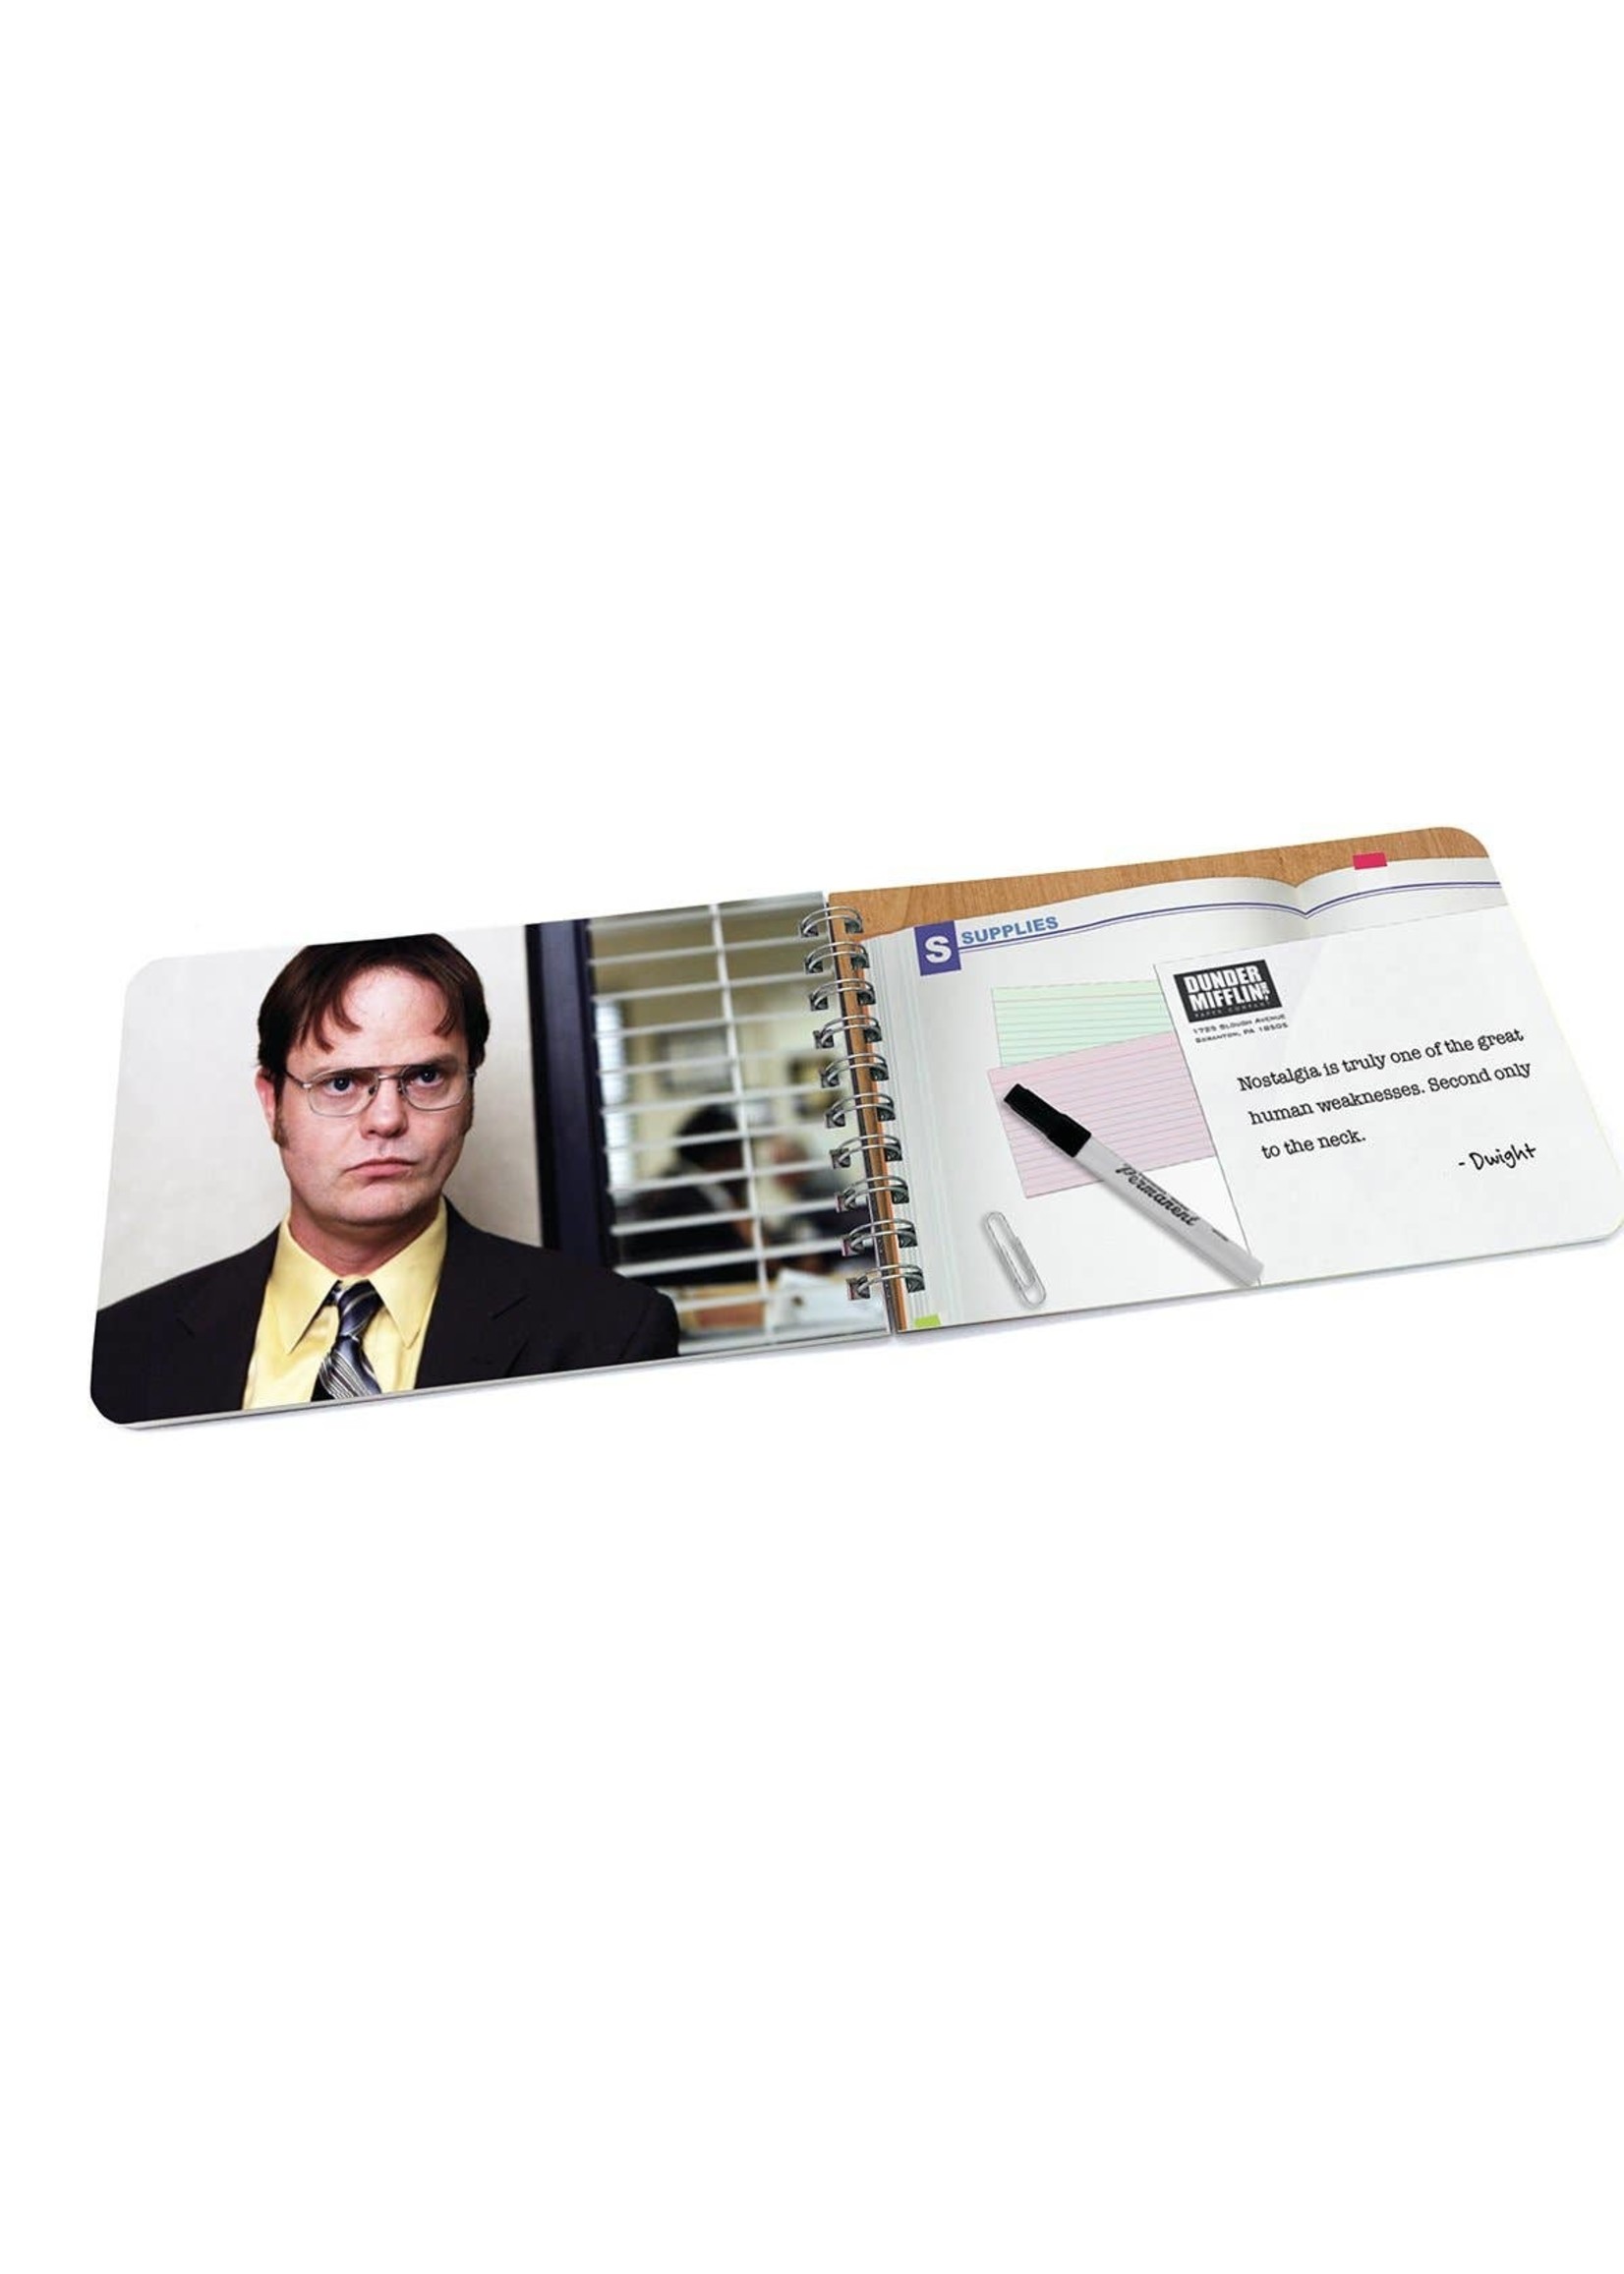 Papersalt The Office, Dwight Schrute Quotes